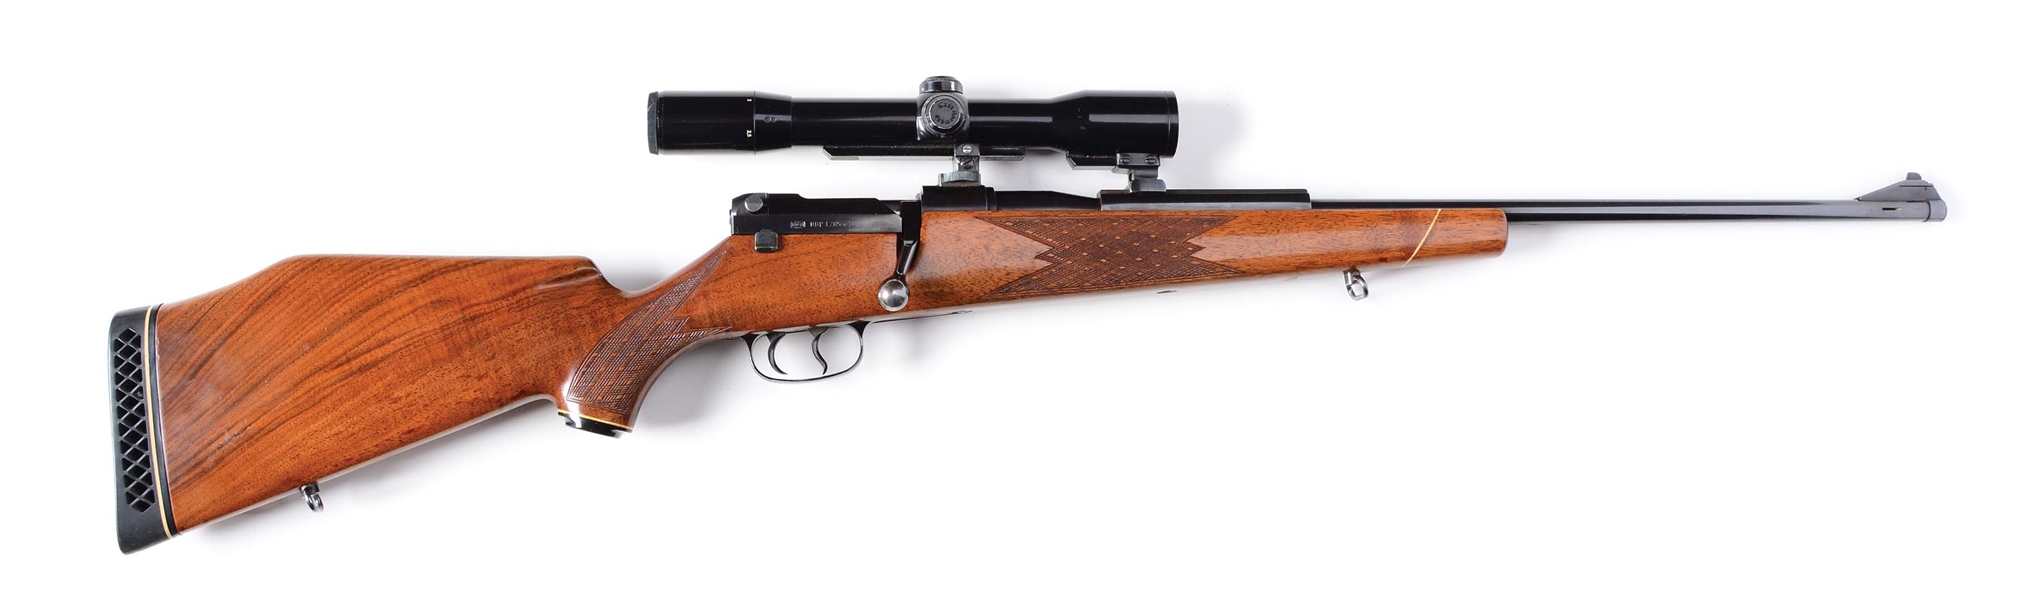 (M) MAUSER MODEL 66 STANDARD MAGNUM BOLT ACTION RIFLE WITH ZEISS SCOPE